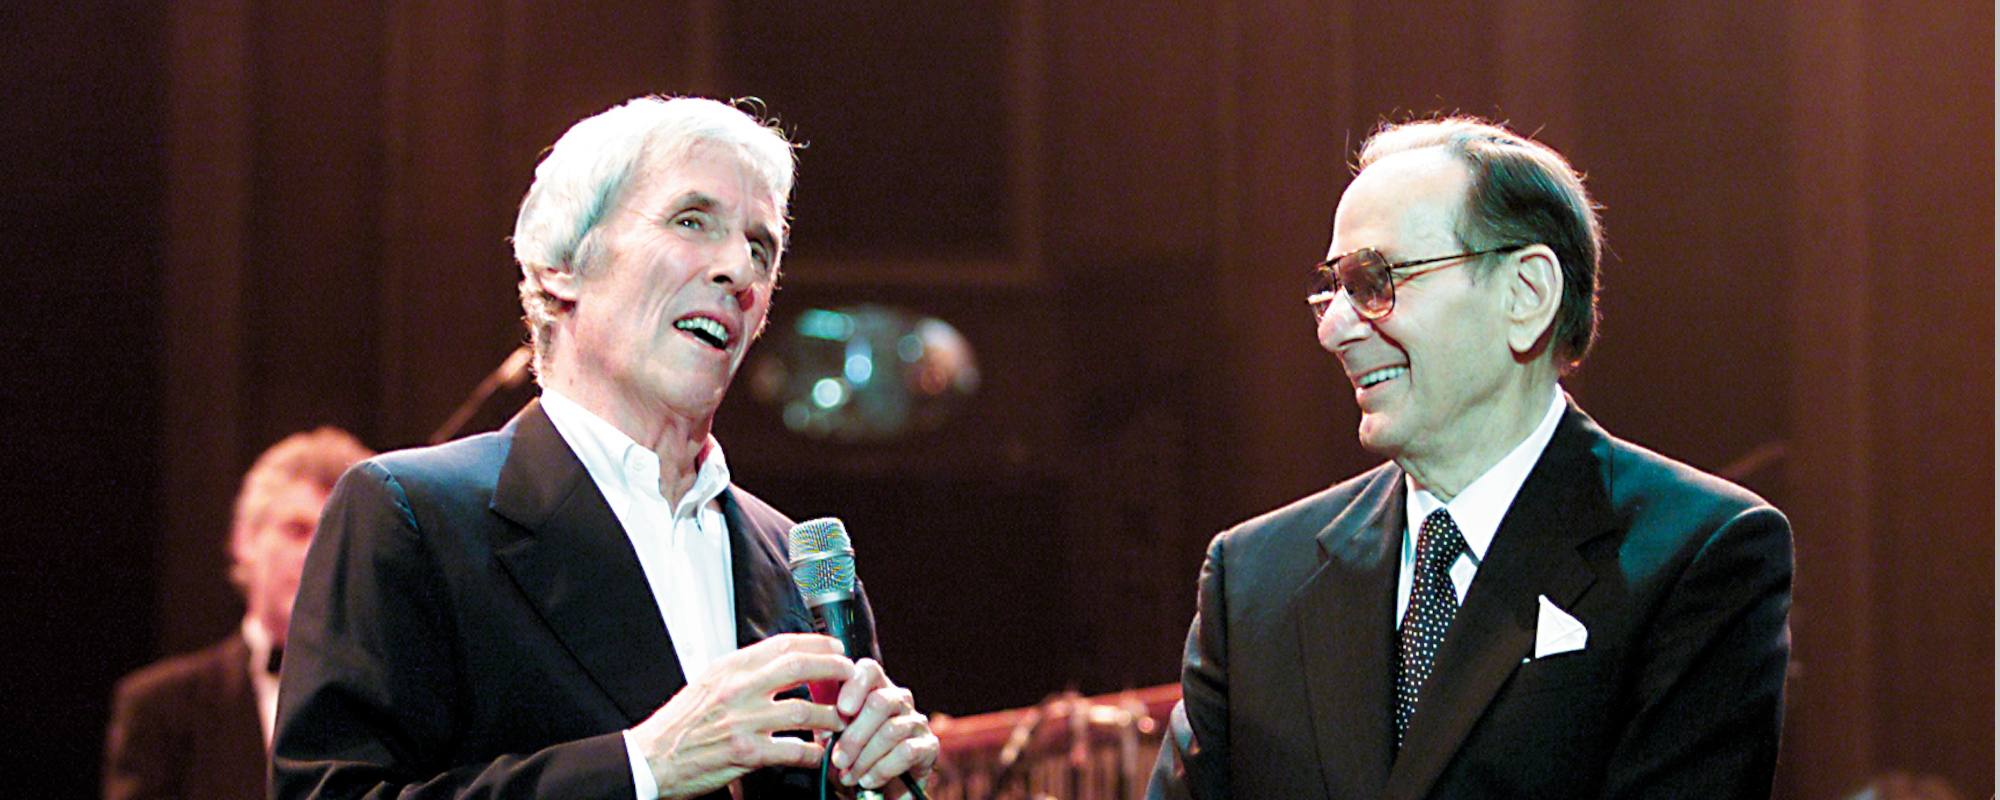 Behind the Grammy-Winning Songwriting Duo of Burt Bacharach and Hal David